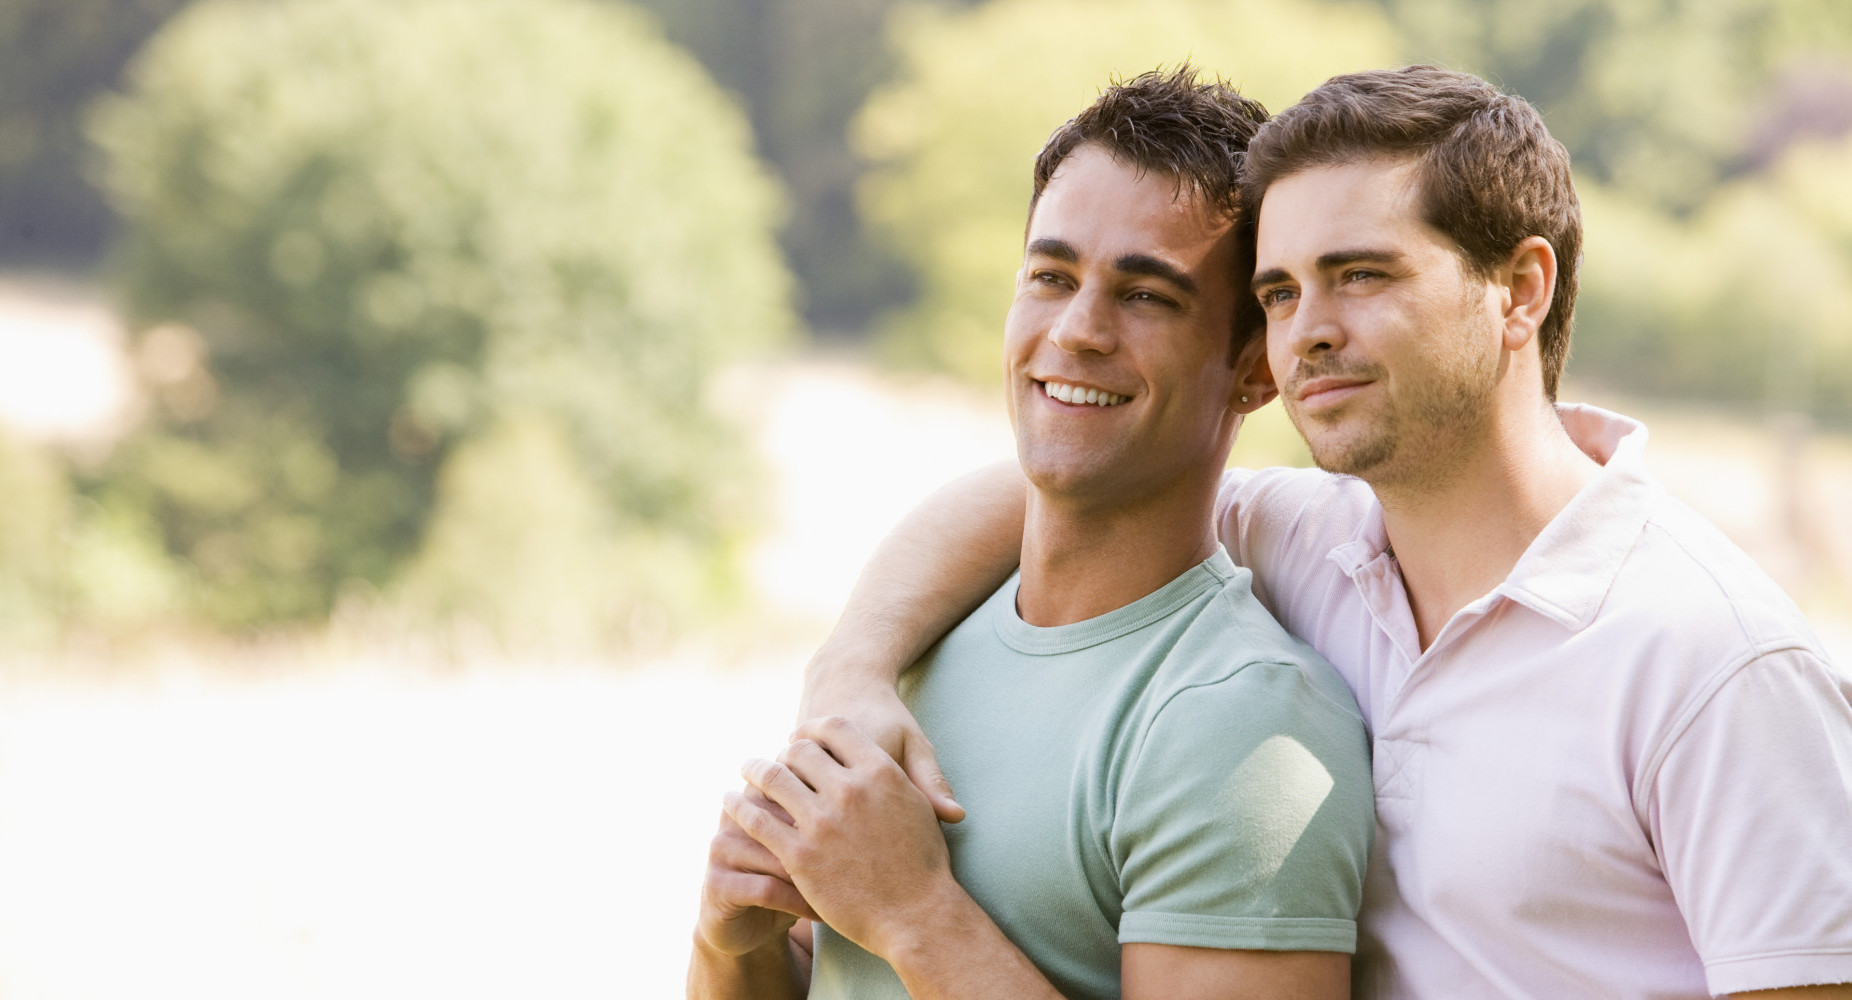 how can i tell if a man i just started dating is gay